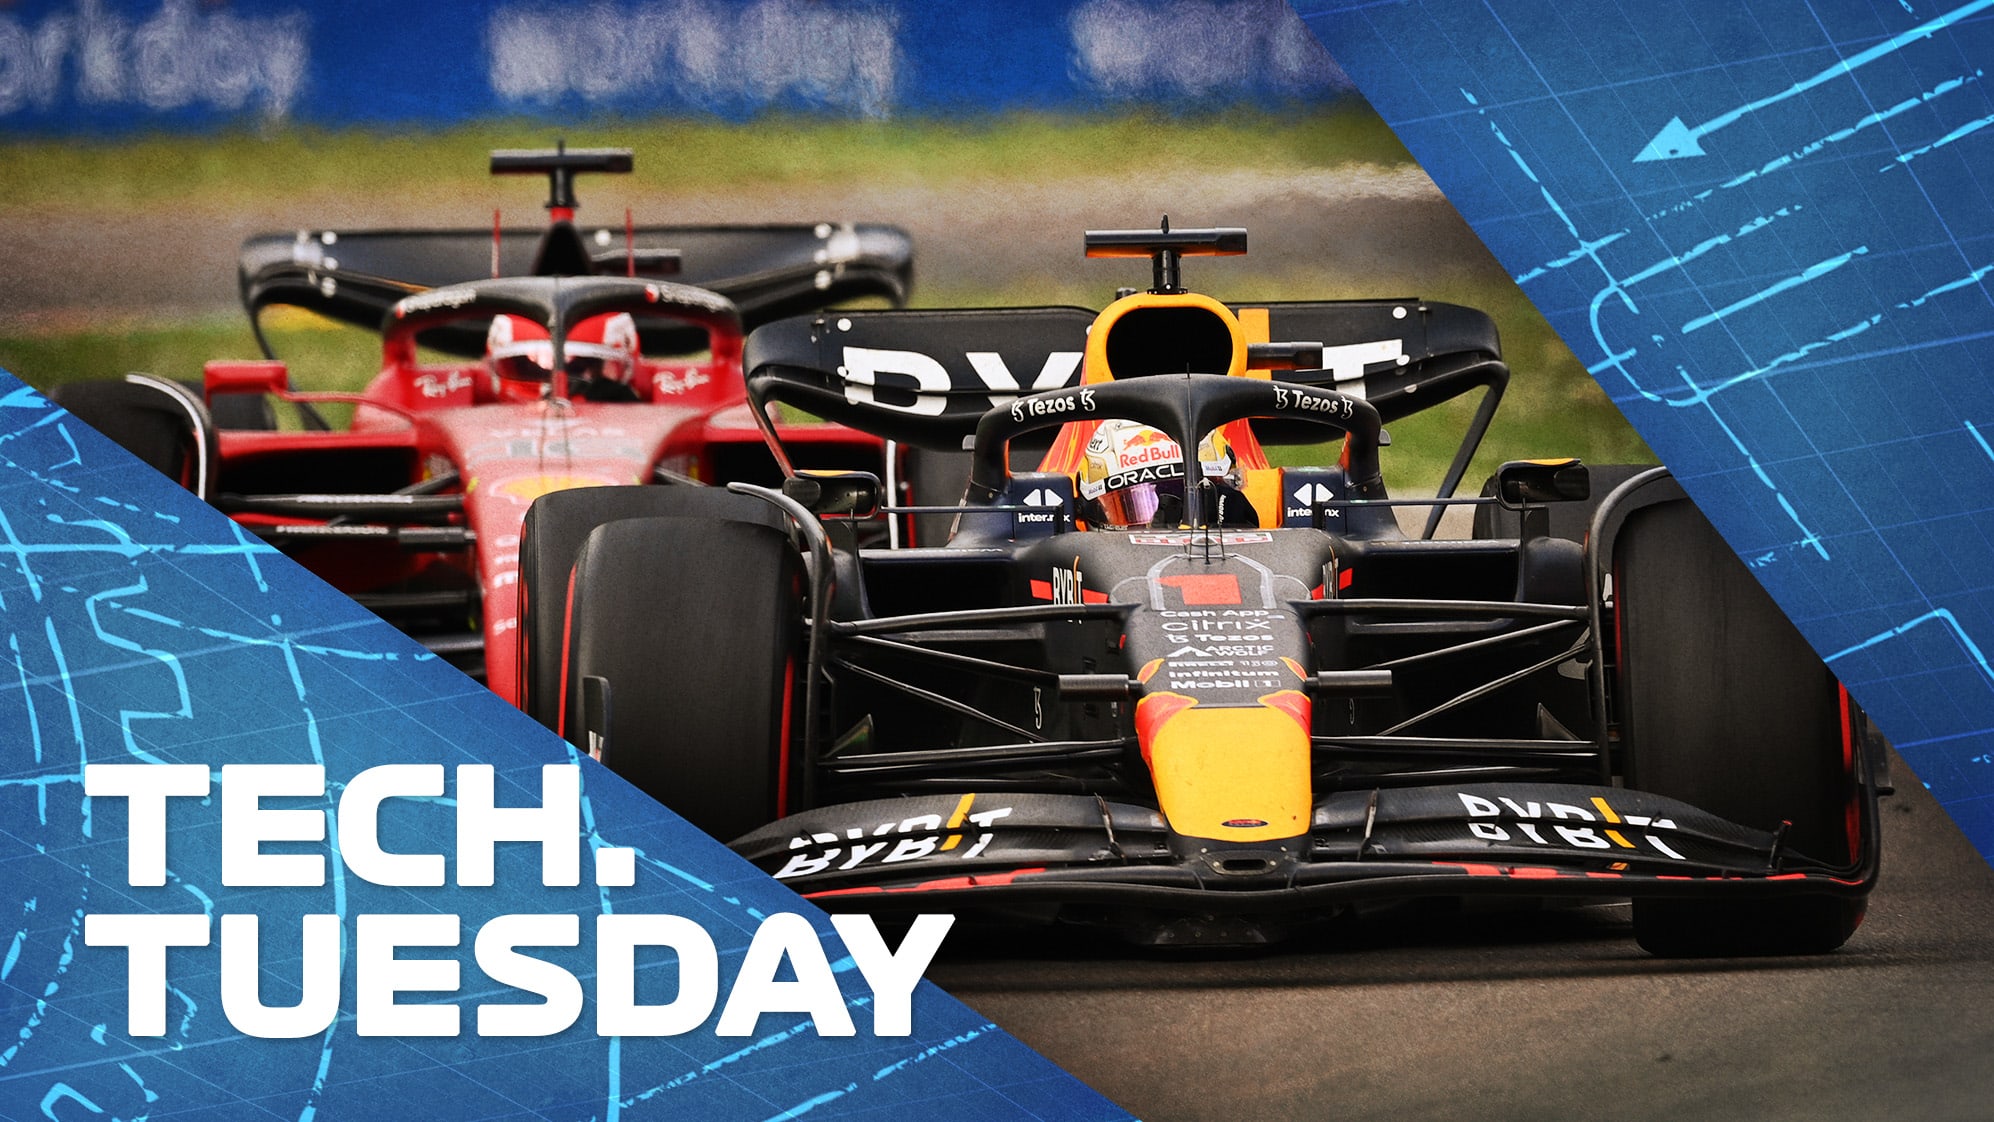 TECH TUESDAY: How performance has swung from Ferrari to Red during the 2022 season | Formula 1®